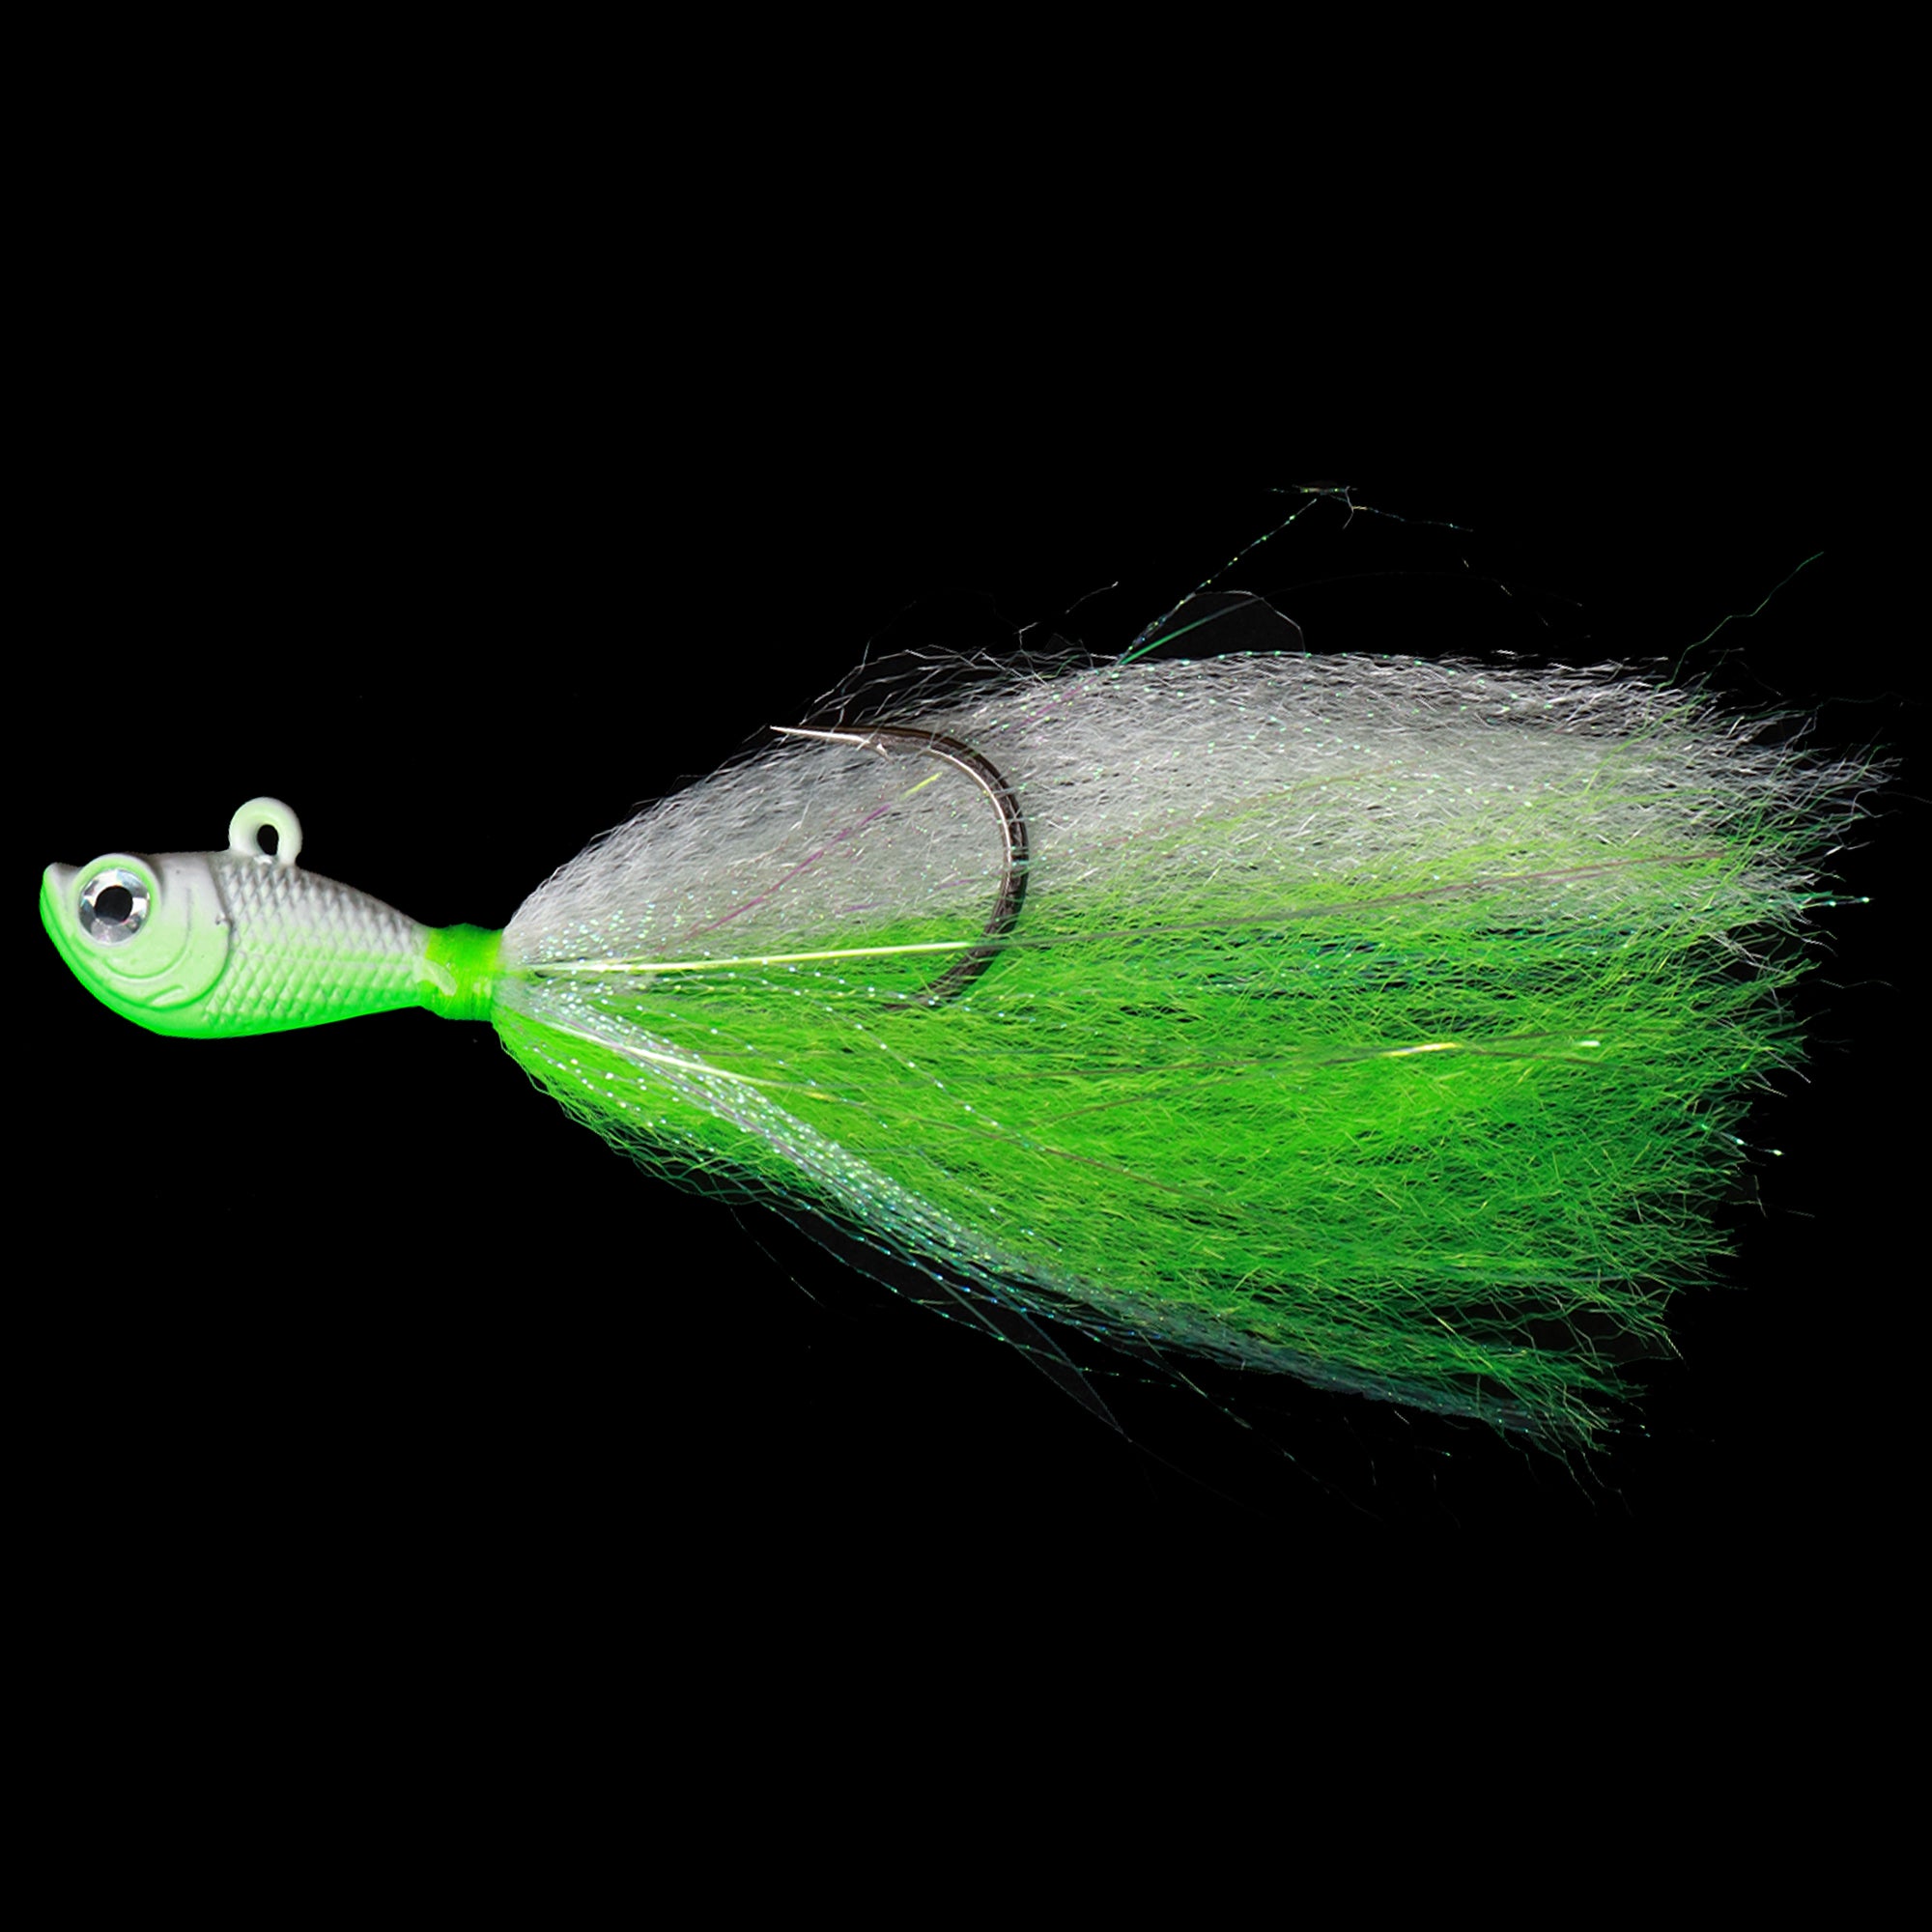 Bait Stalkers: Stinger Flies to Catch Extra Catfish Add to Any Catfishing  Rig 5-Pack Yellow Perch